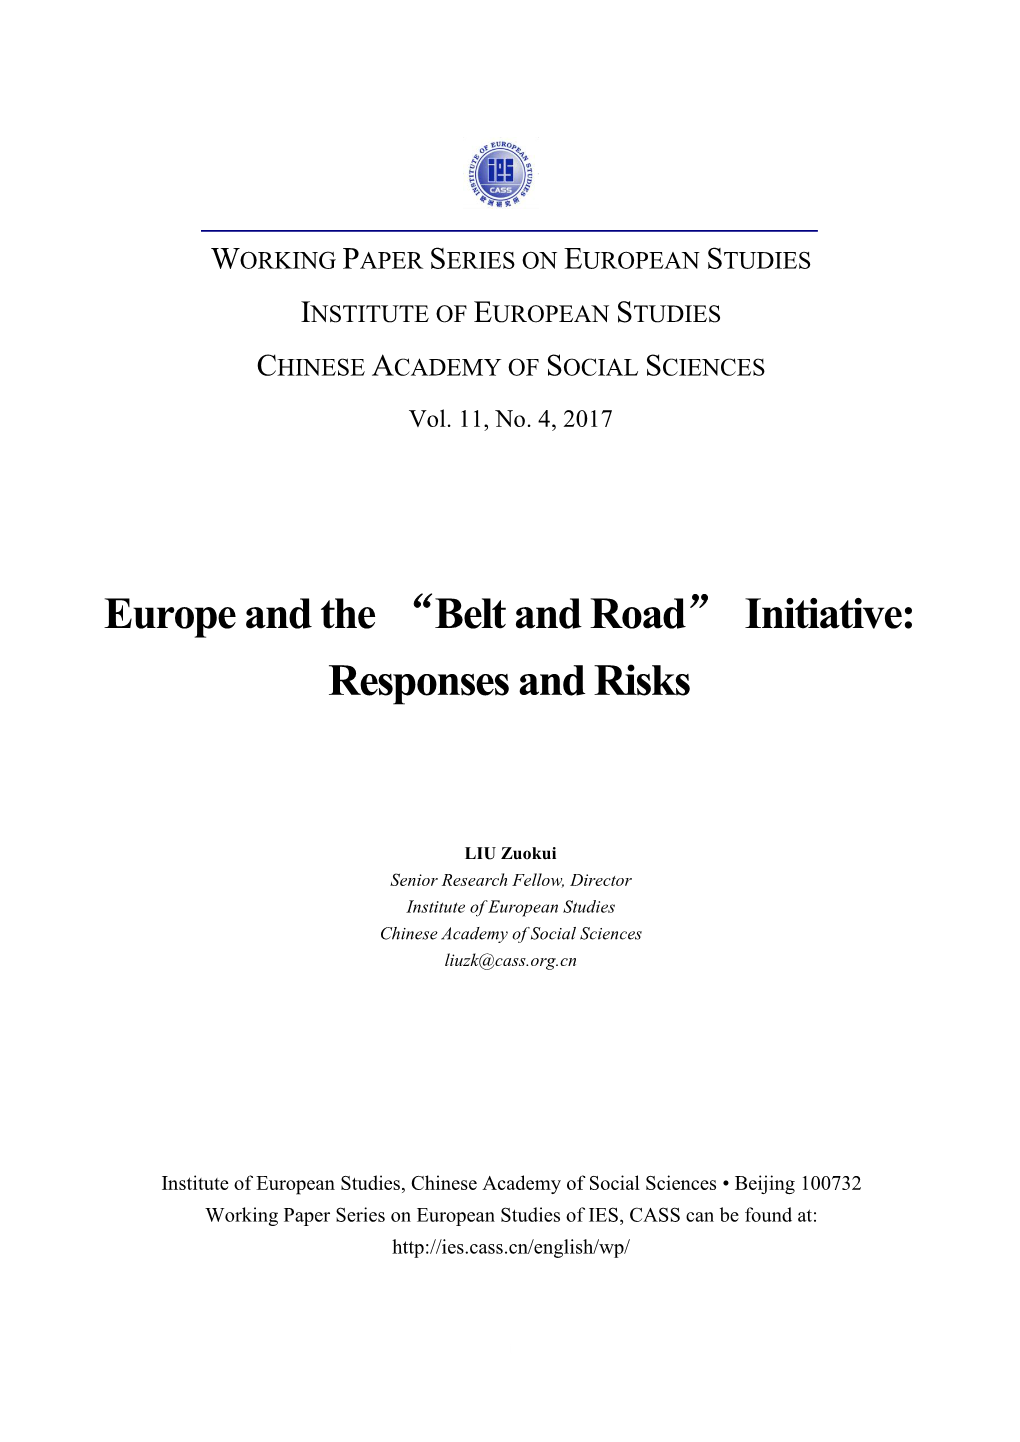 “Belt and Road” Initiative:Responses and Risks